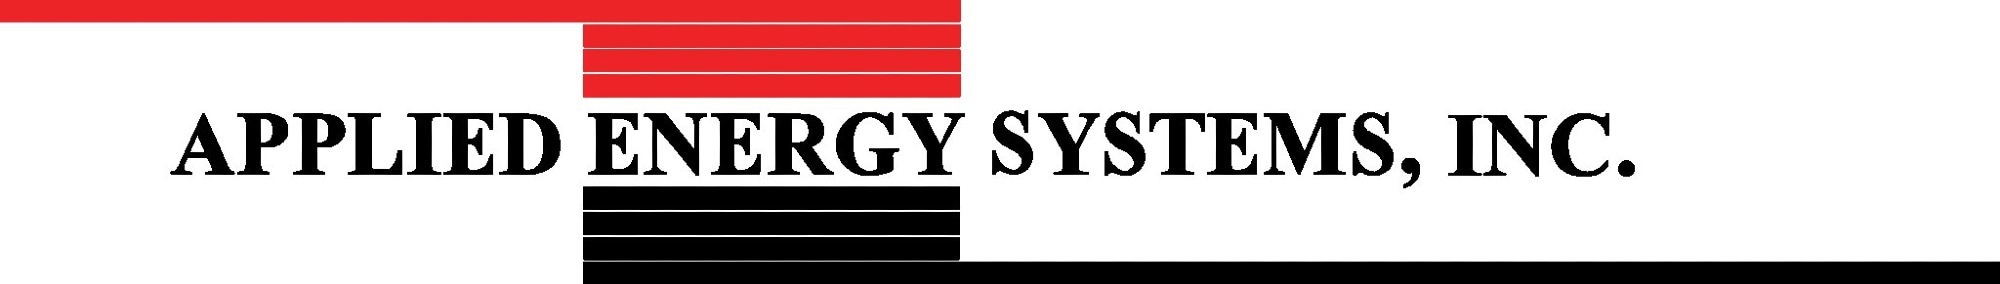 Applied Energy Systems, Inc.